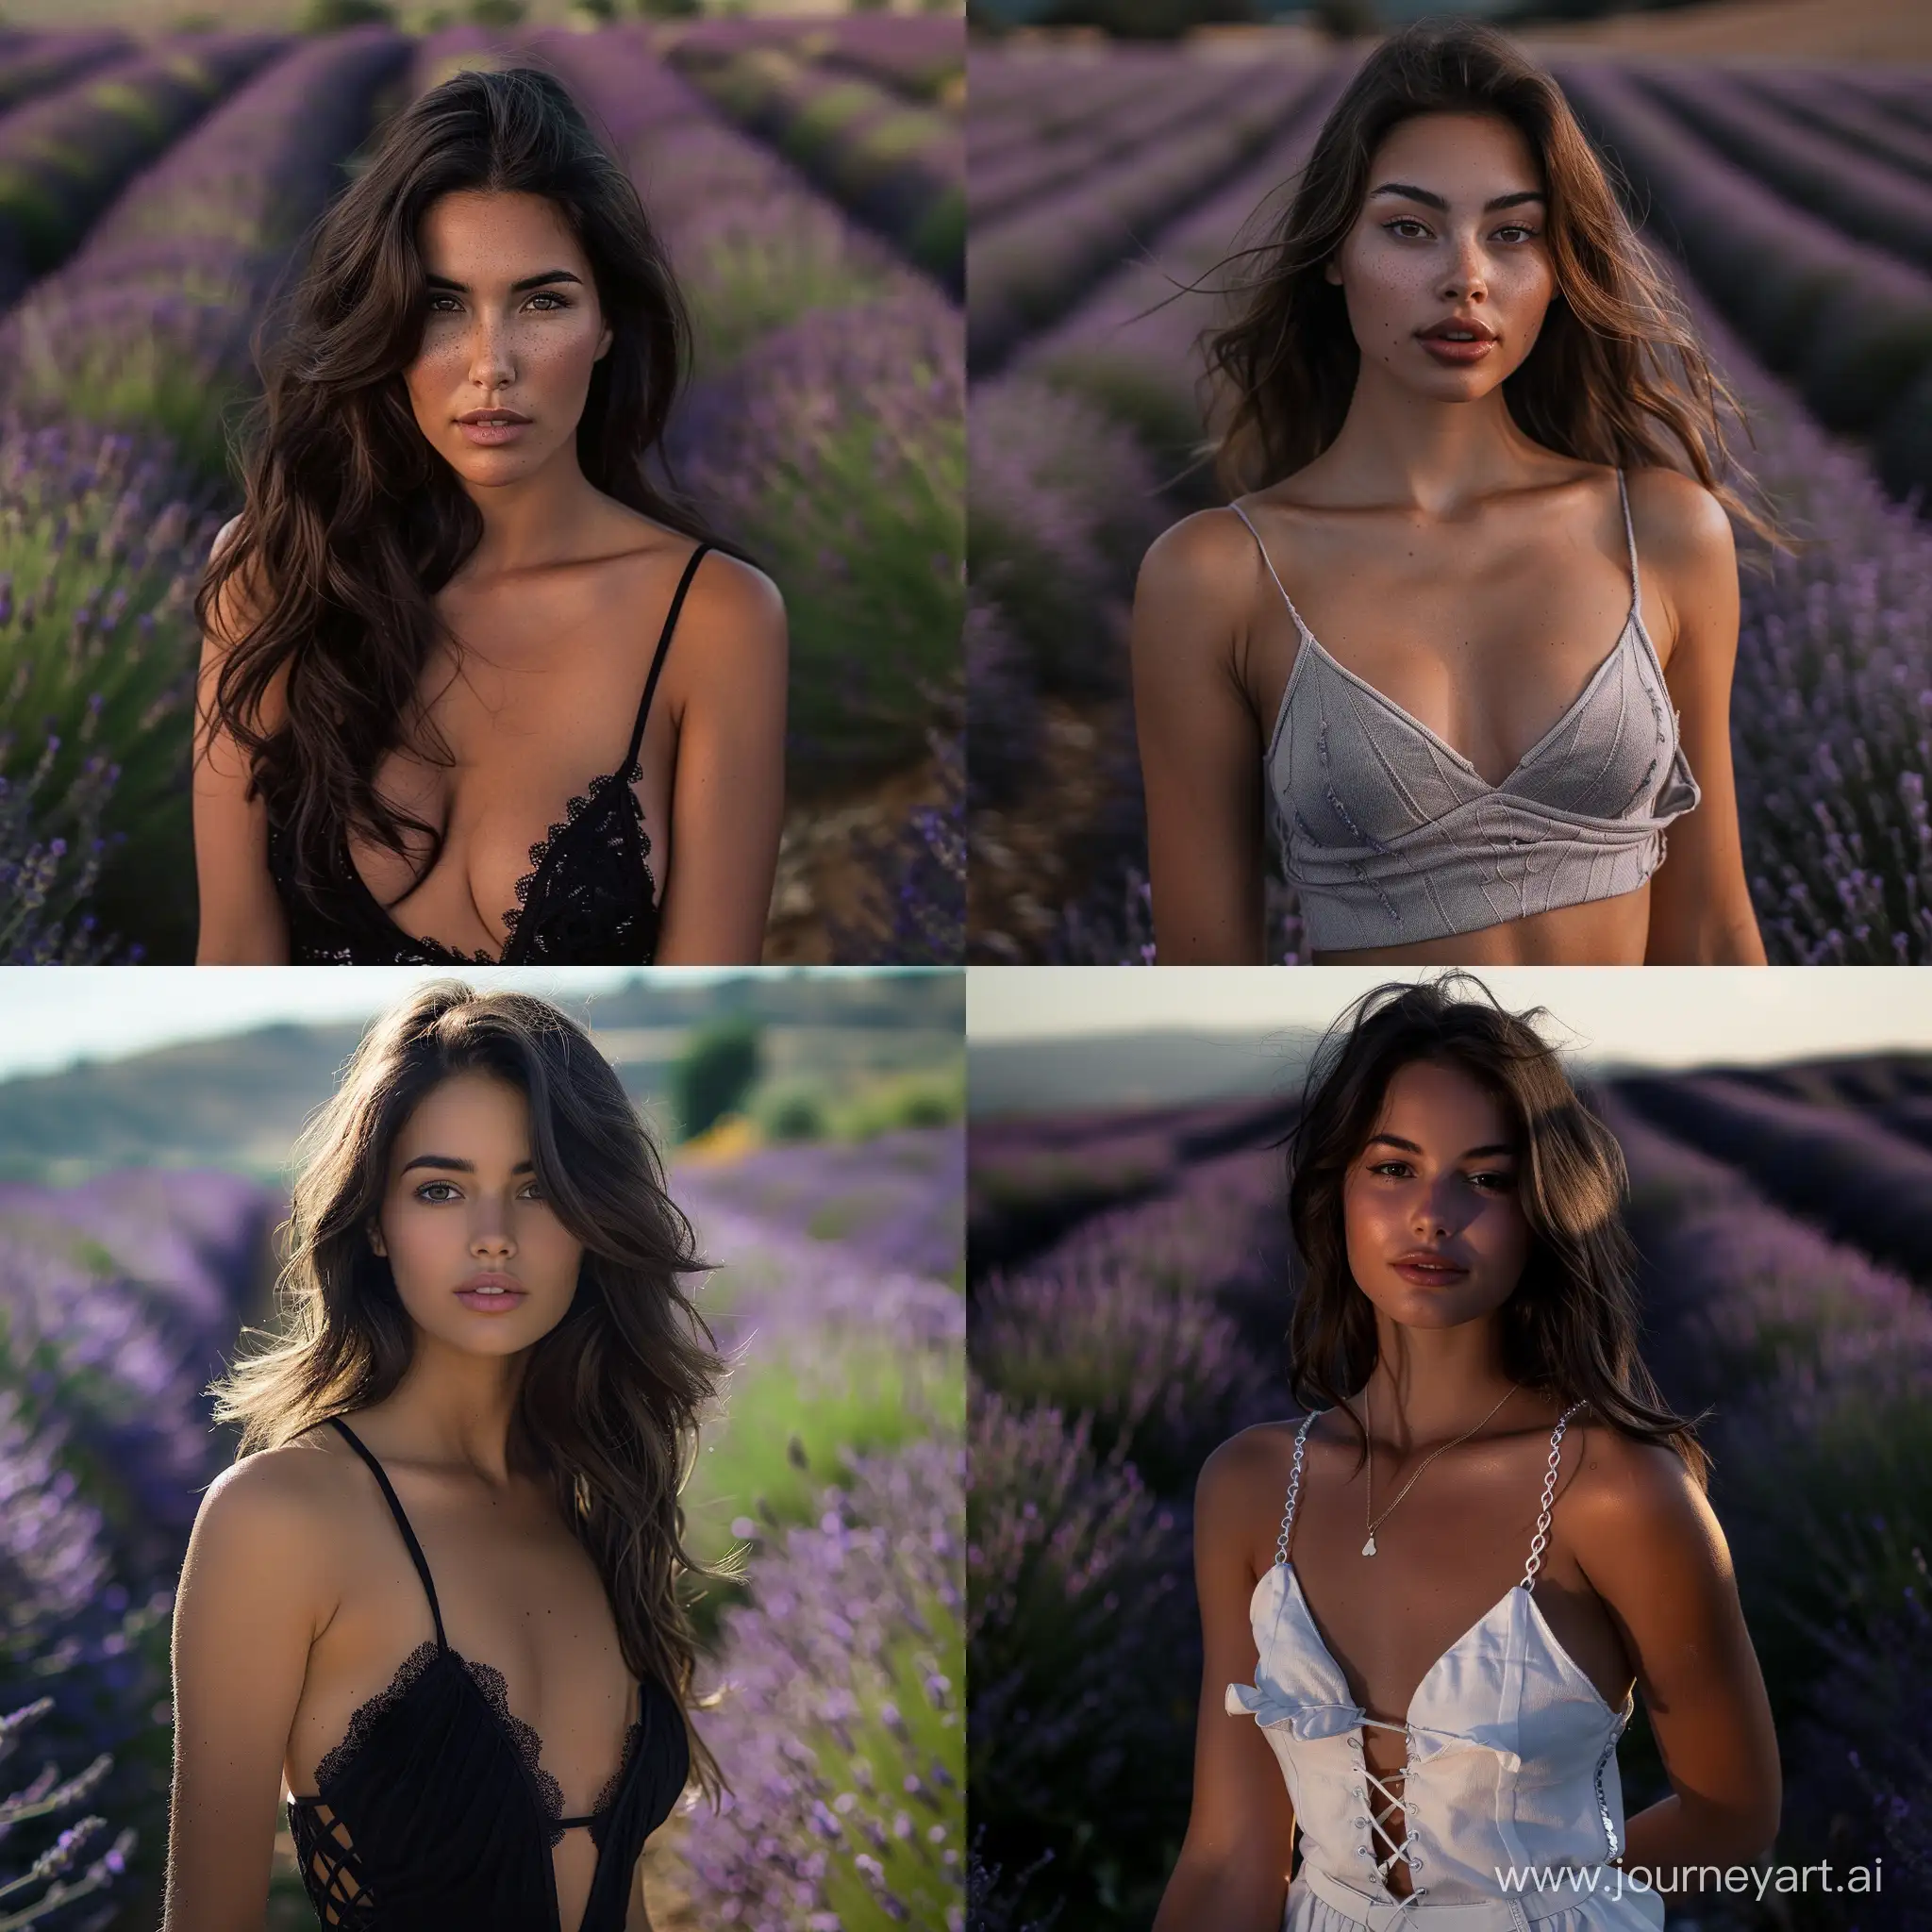 hour glass physique, brunette model that dose not exist in real life, standing in a lavender field, slight smirk